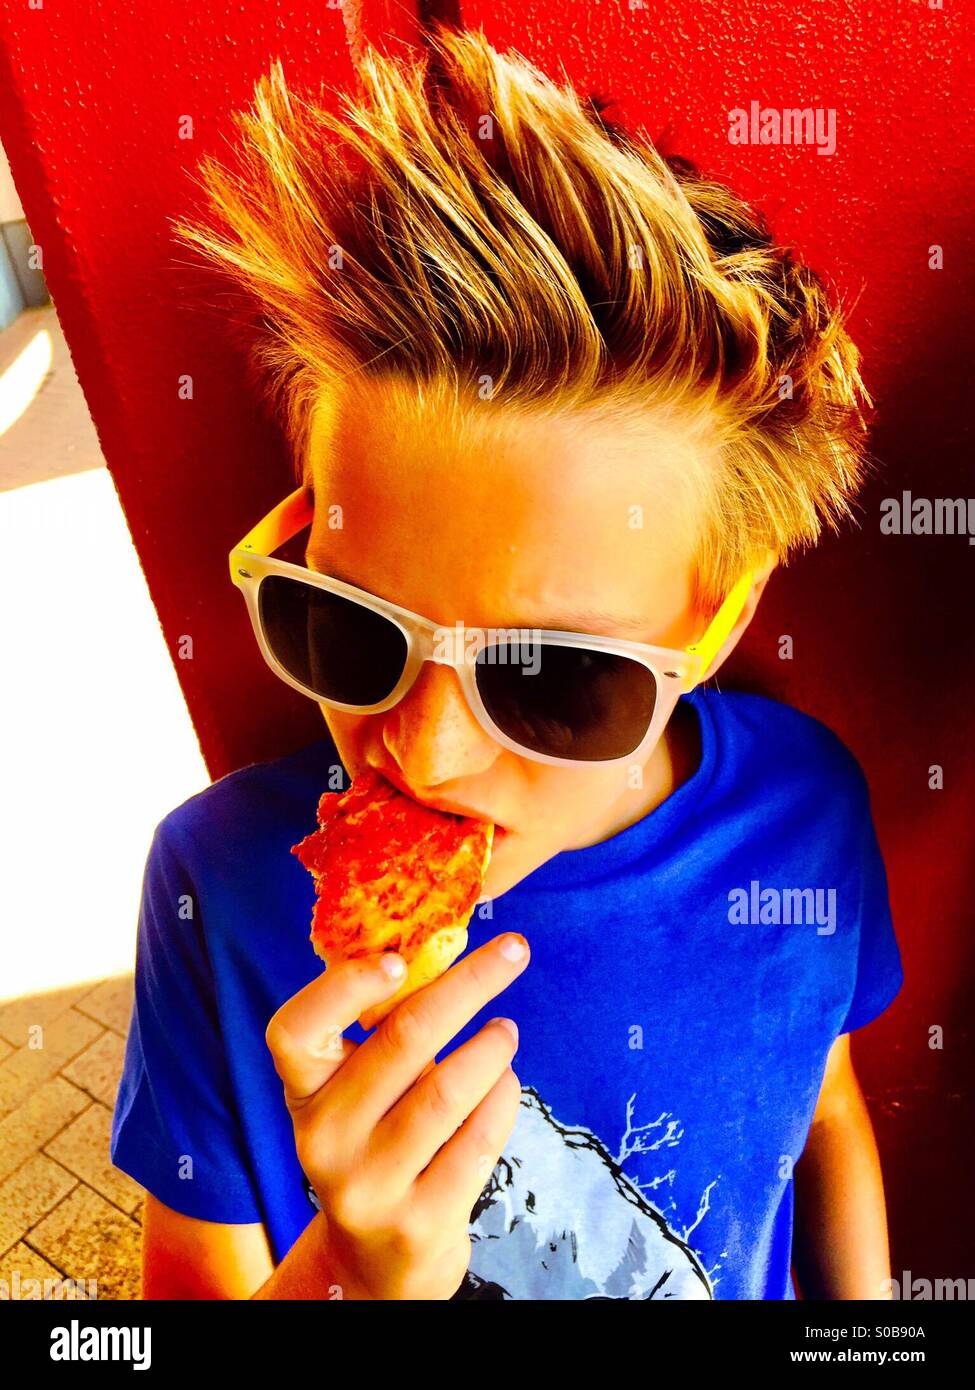 A colourful photo of a boy eating pizza Stock Photo